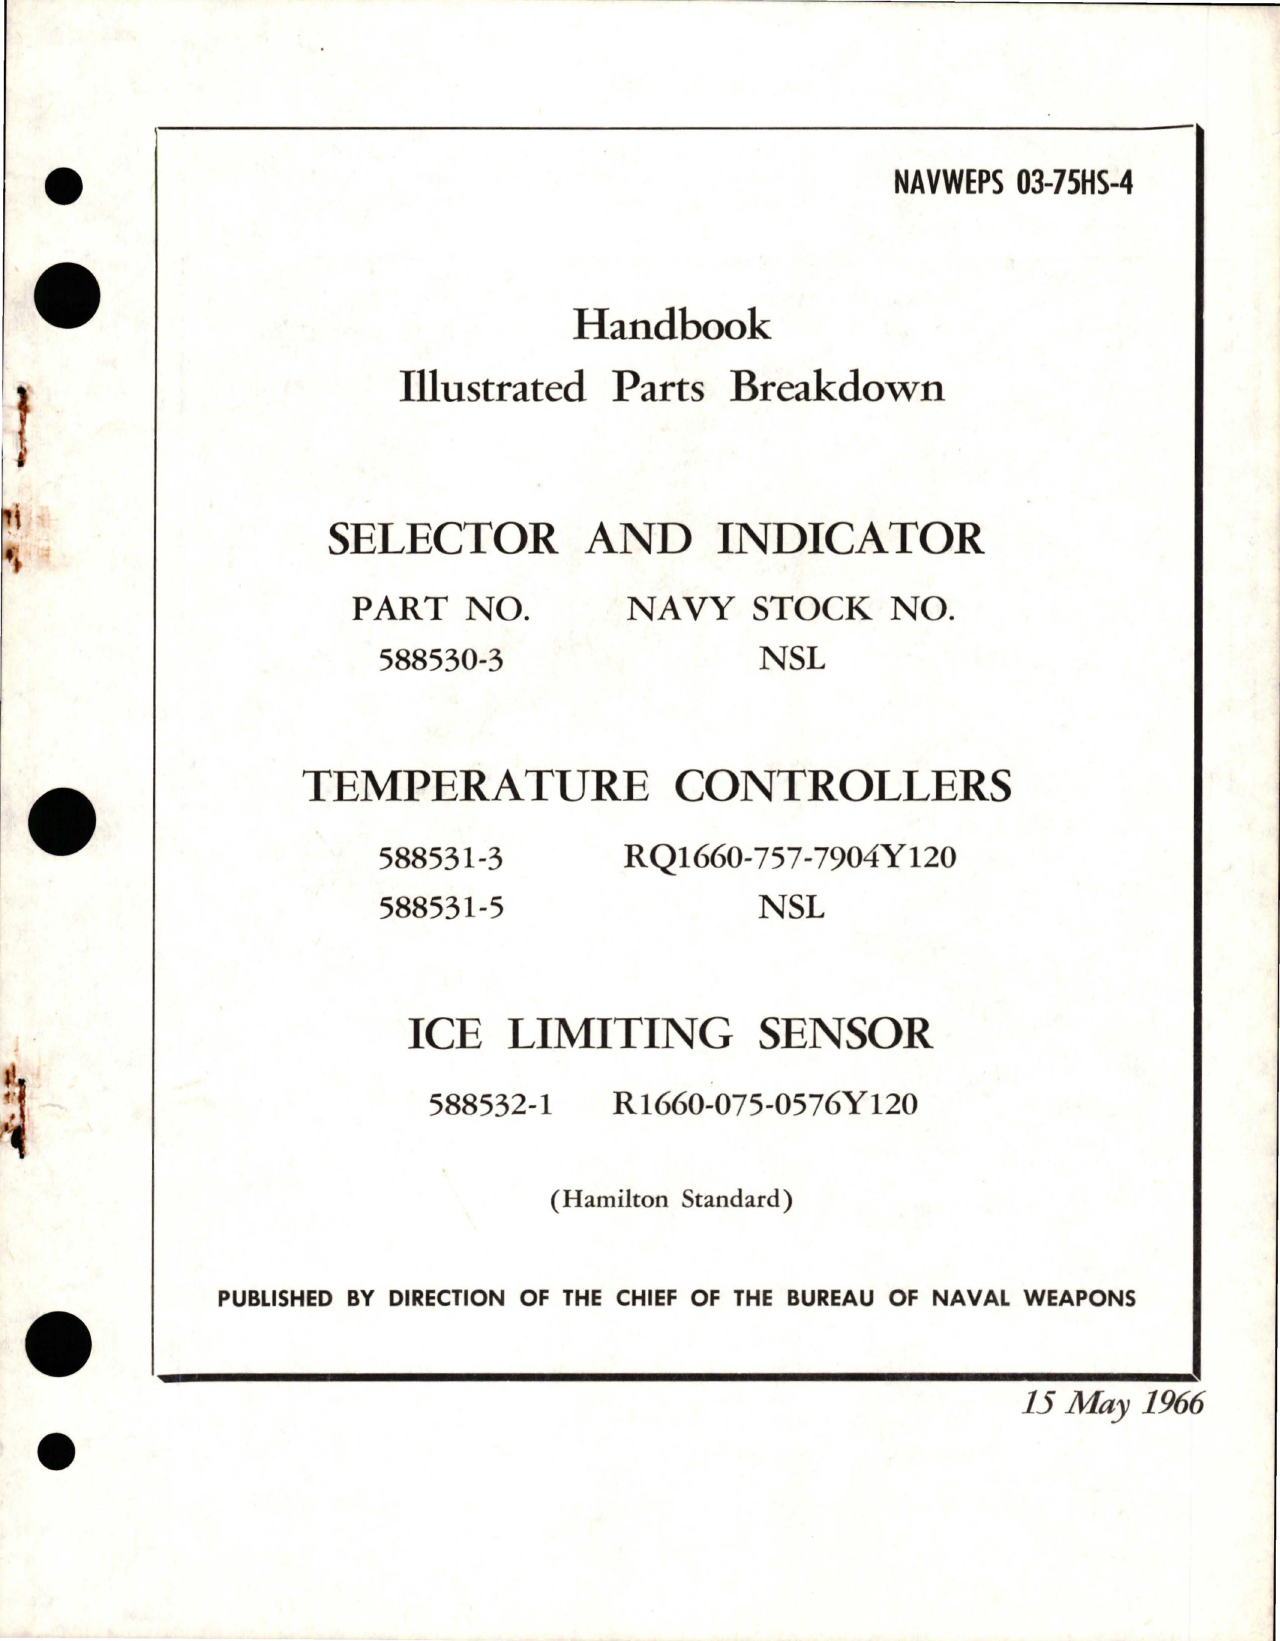 Sample page 1 from AirCorps Library document: Illustrated Parts Breakdown for Selector and Indicator - 588530-3, Temperature Controllers 588531-3, 533531-5, and Ice Limiting Sensor 588532-1